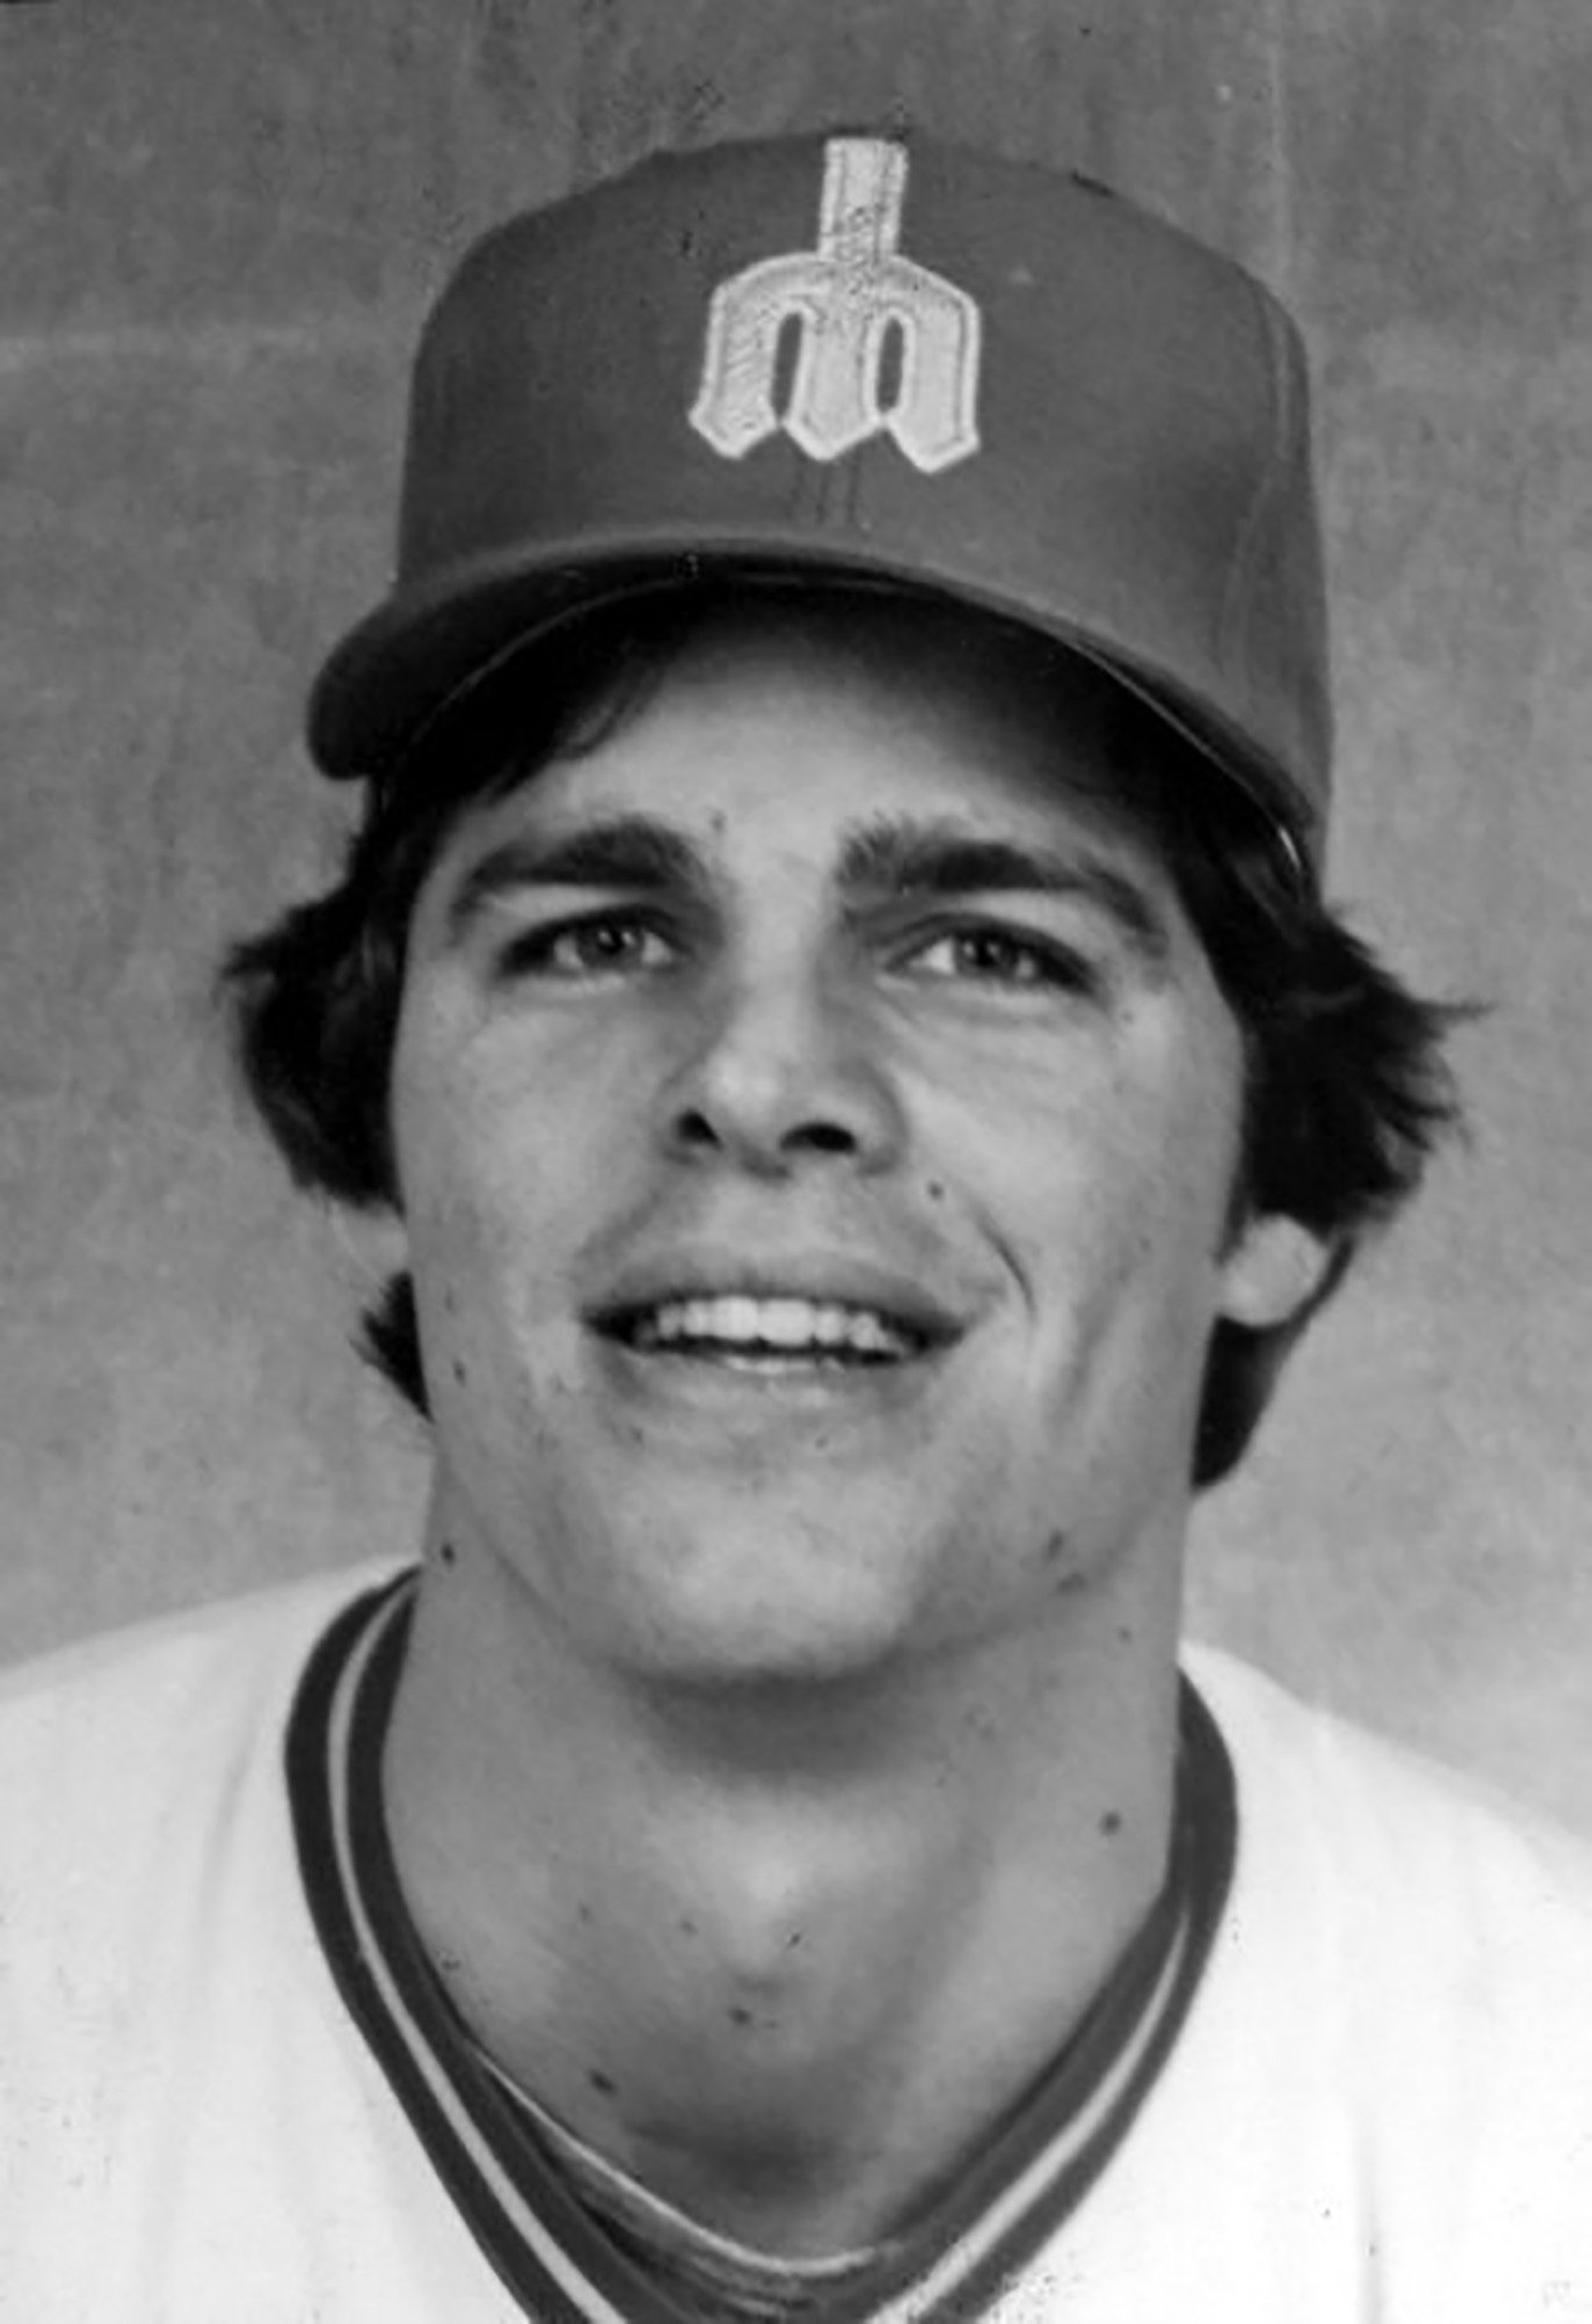 Commentary: 1979 Mariners All-Star Bruce Bochte's Life After